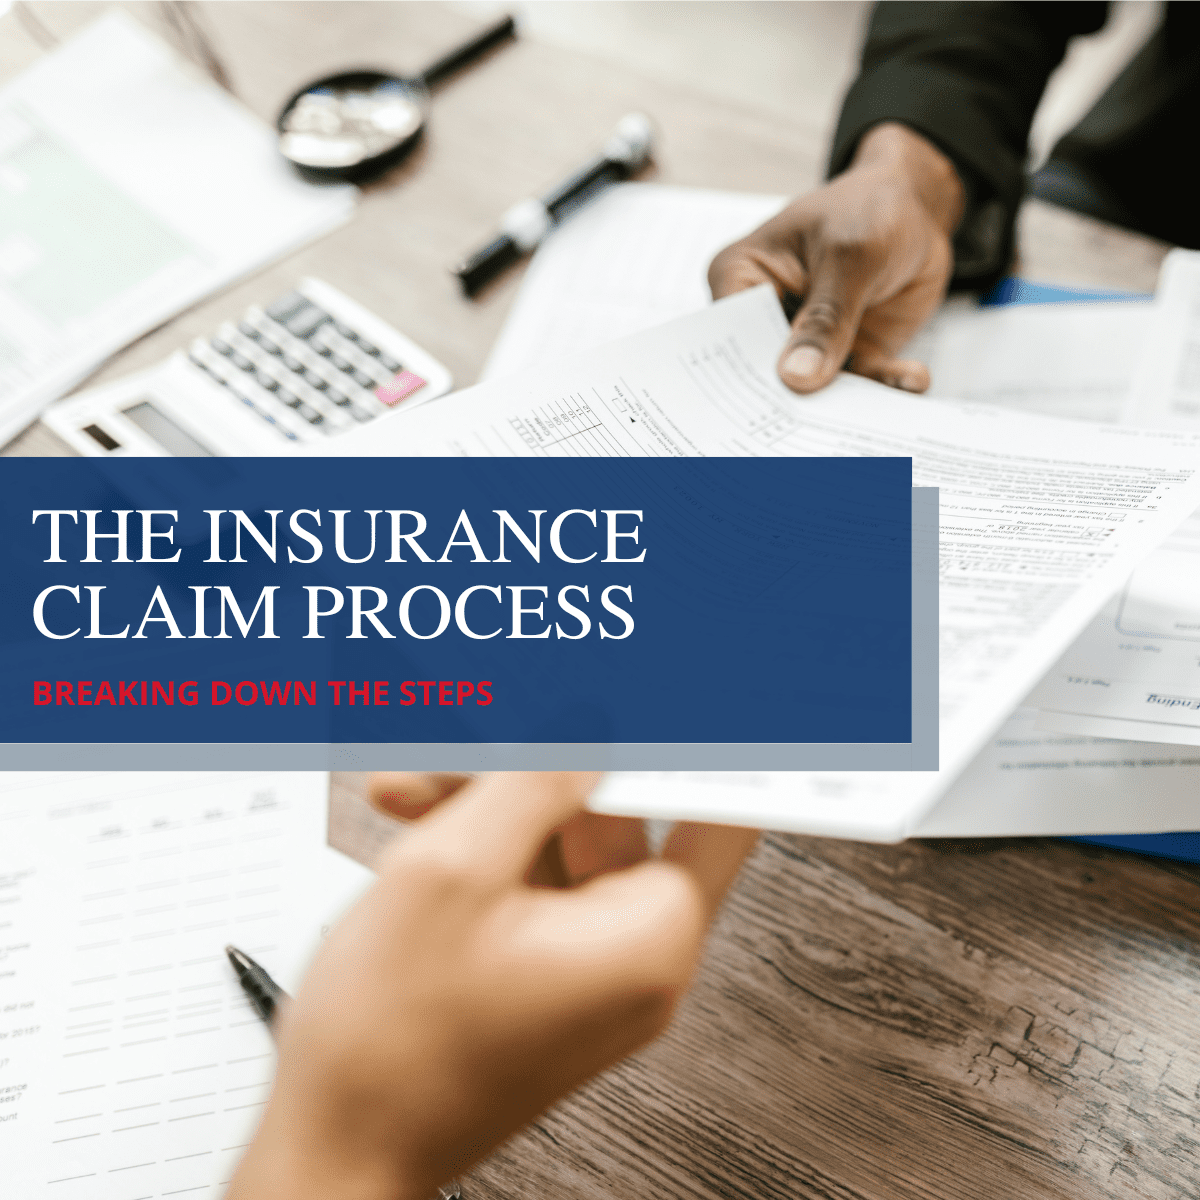 Breaking Down the Property Insurance Claim Process